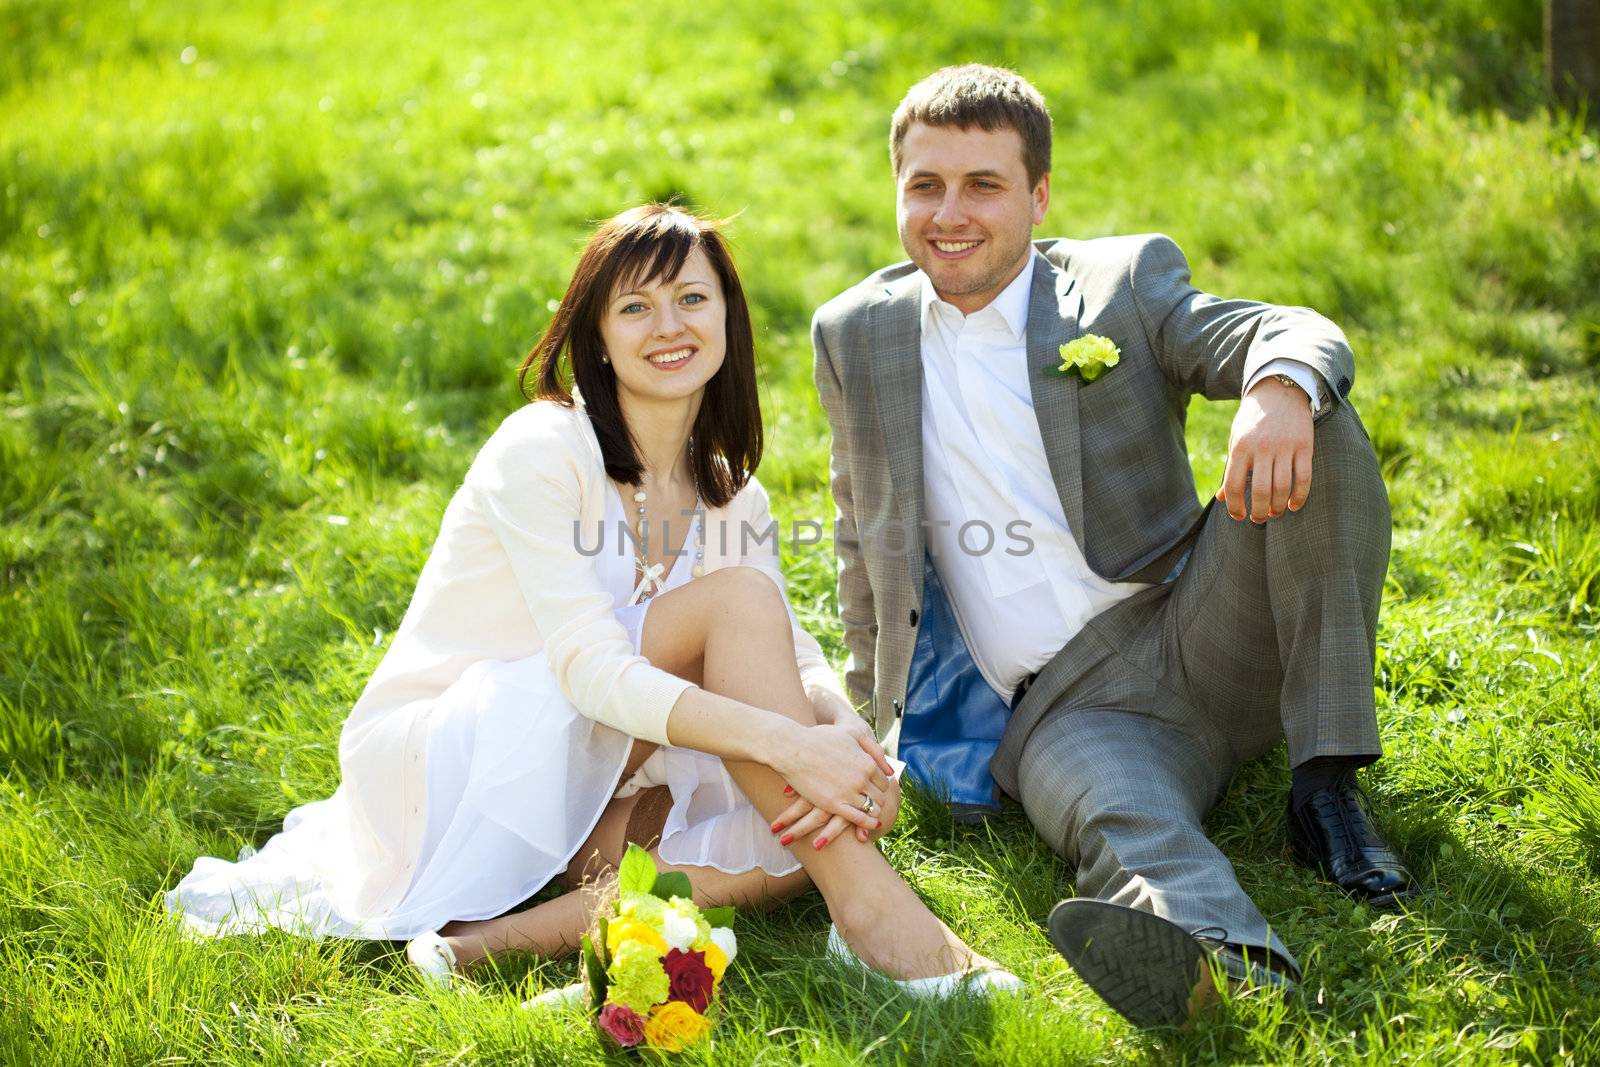  just married in a flowering garden sitting on the grass by jannyjus